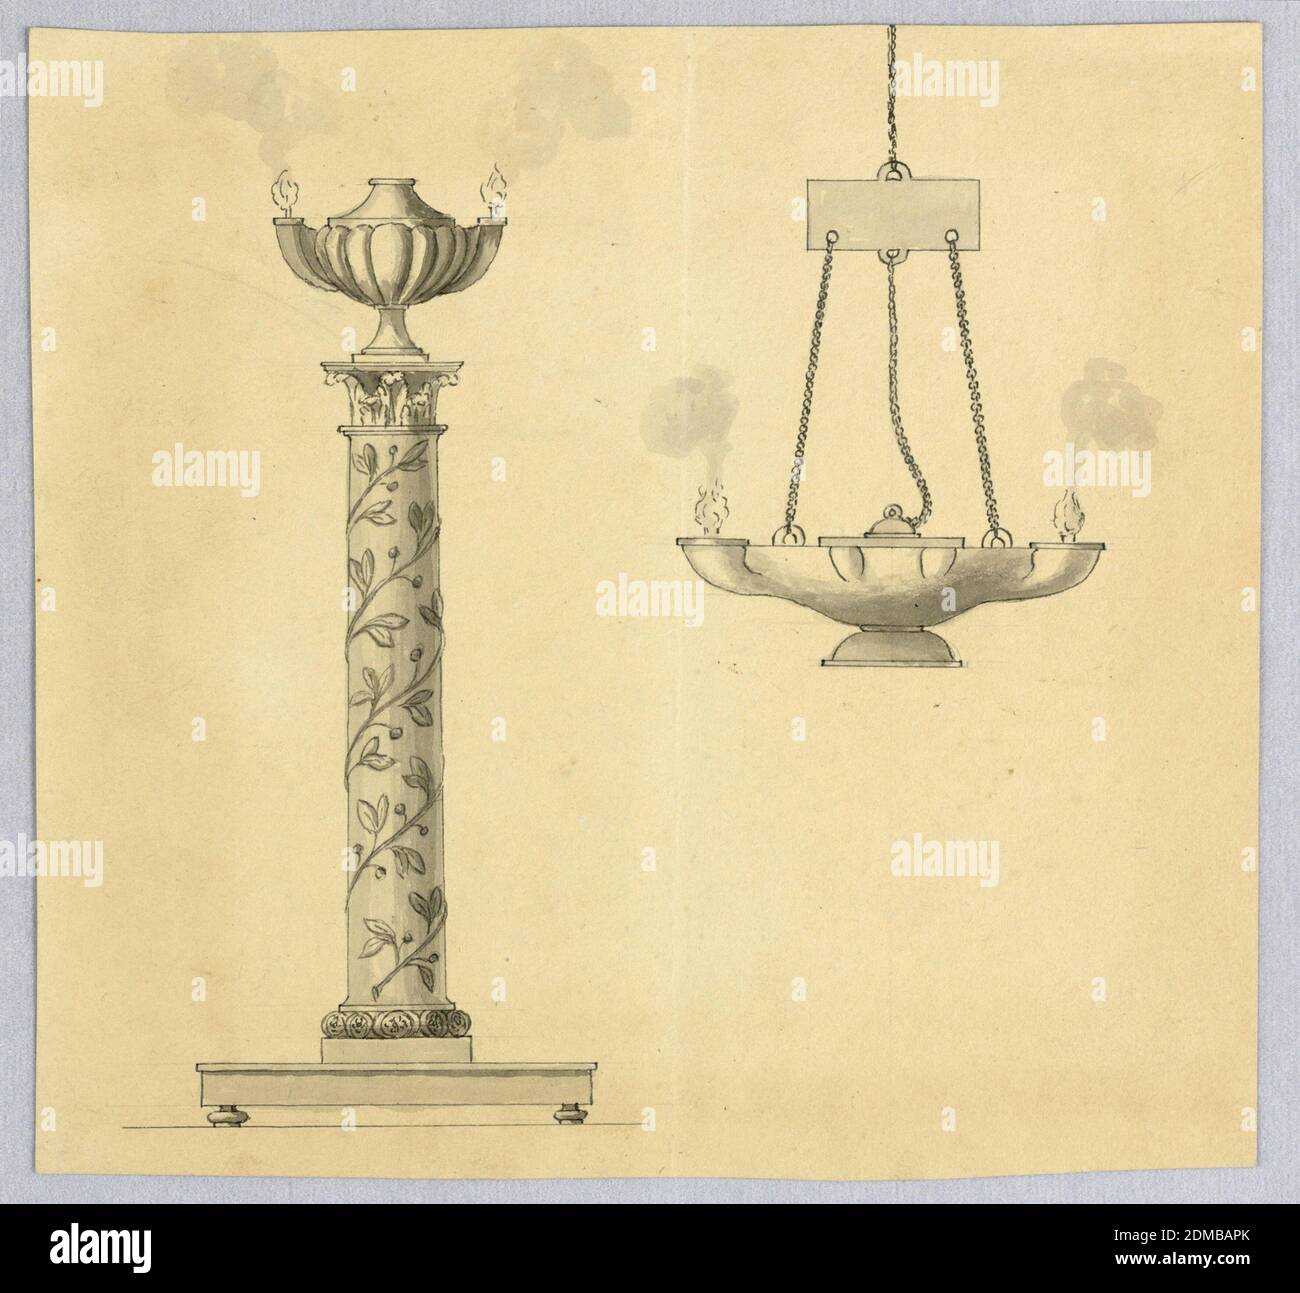 Designs for Oil Lamps, Pen and black ink, brush and wash, graphite on paper, Horizontal rectangle. Designs for a standing and a hanging oil lamp. At left, a Corinthian column, around the shaft of which a laurel bough is wound, rises from a base which is supported by knobs. The column supports the lamp at top, which is shaped like a bossed urn with two spouts laterally. At top right, a lamp with two spouts hangs on two chains from a metal plate which is hanging on a chain. A cover rising from the central part of the lamp hangs on a chain from the bottom of the plate. Both lamps are lighted Stock Photo